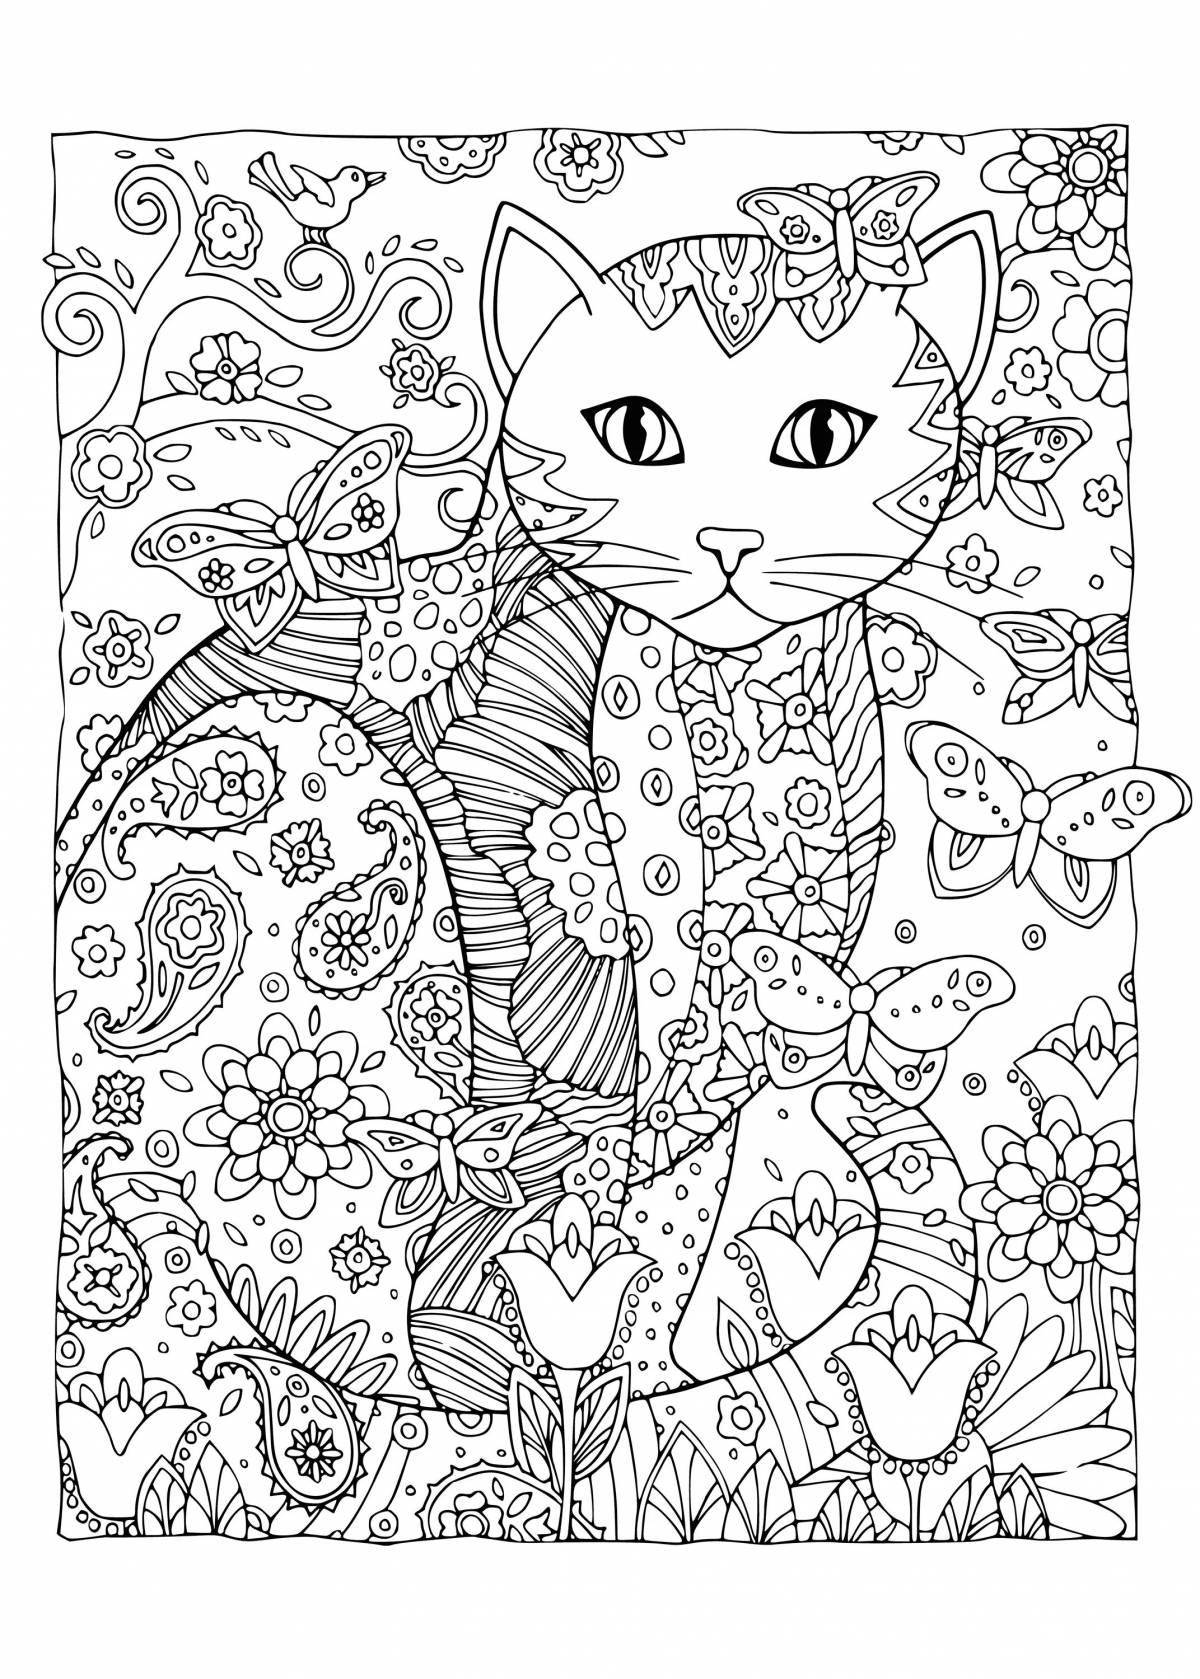 Radiant coloring page complex cats